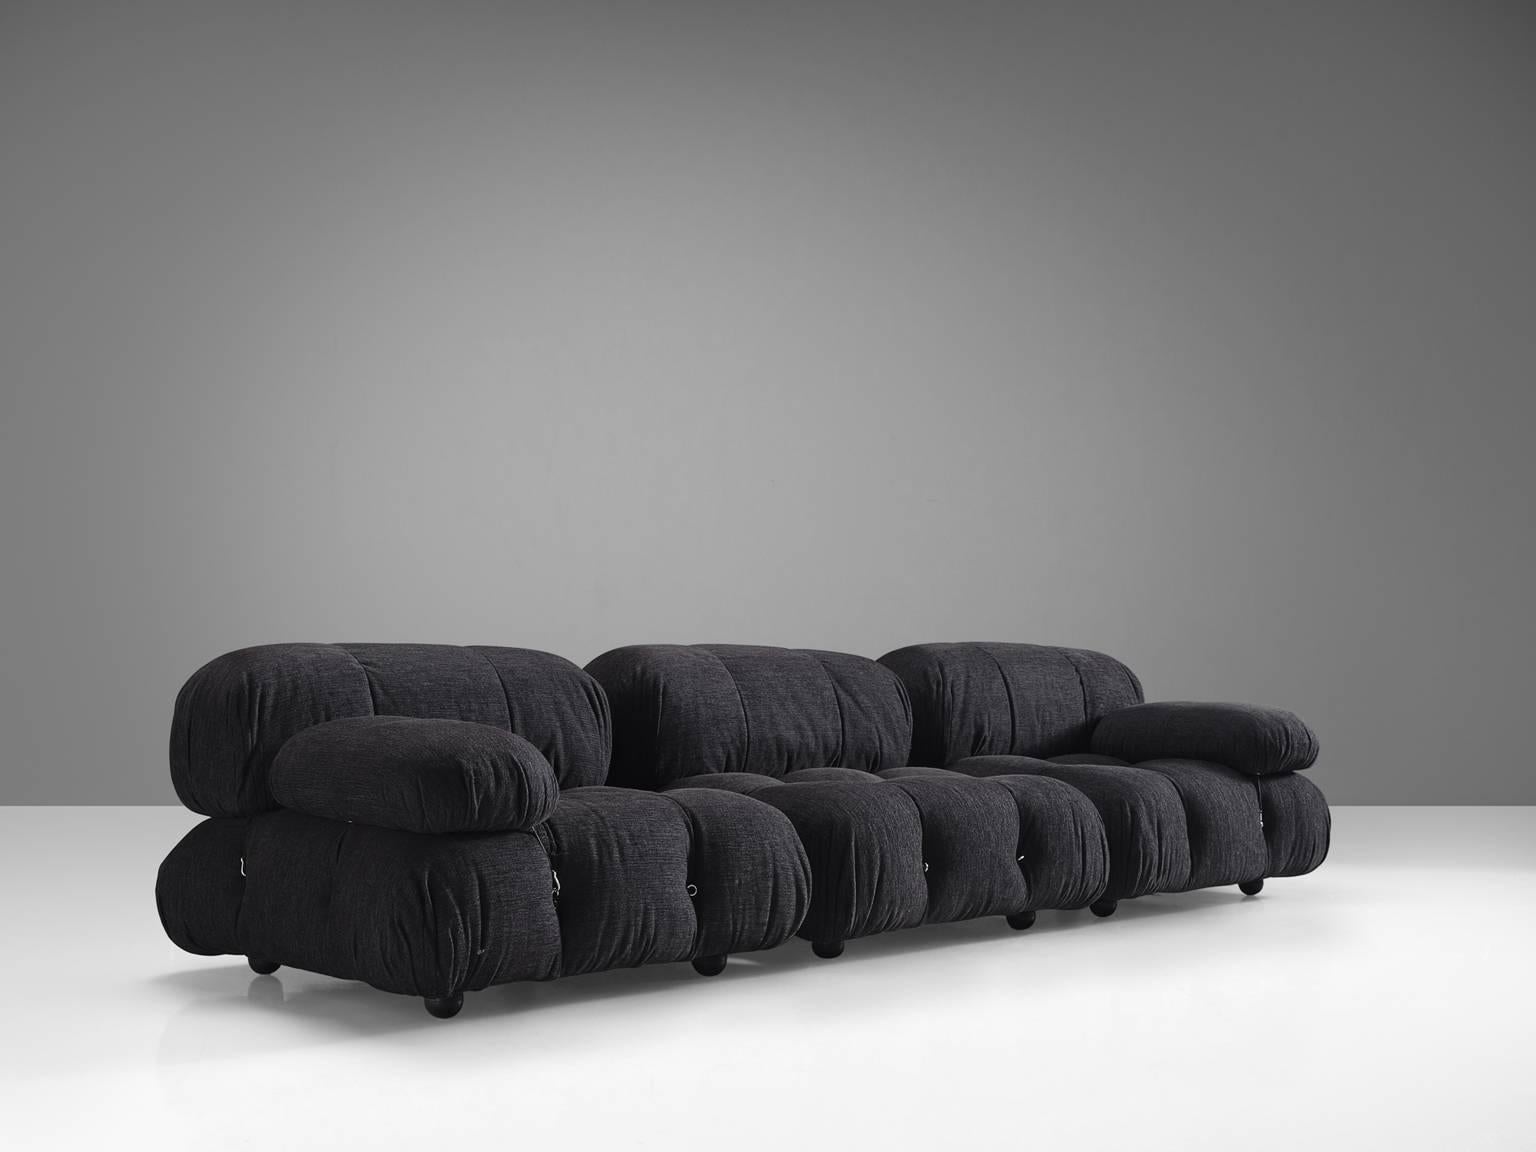 Mario Bellini, modular 'Cameleonda' sofa in dark grey fabric, Italy, 1972.

The sectional elements of this can be used freely and apart from one another. The backs and armrests are provided with rings and carabiners, which allows the user to create